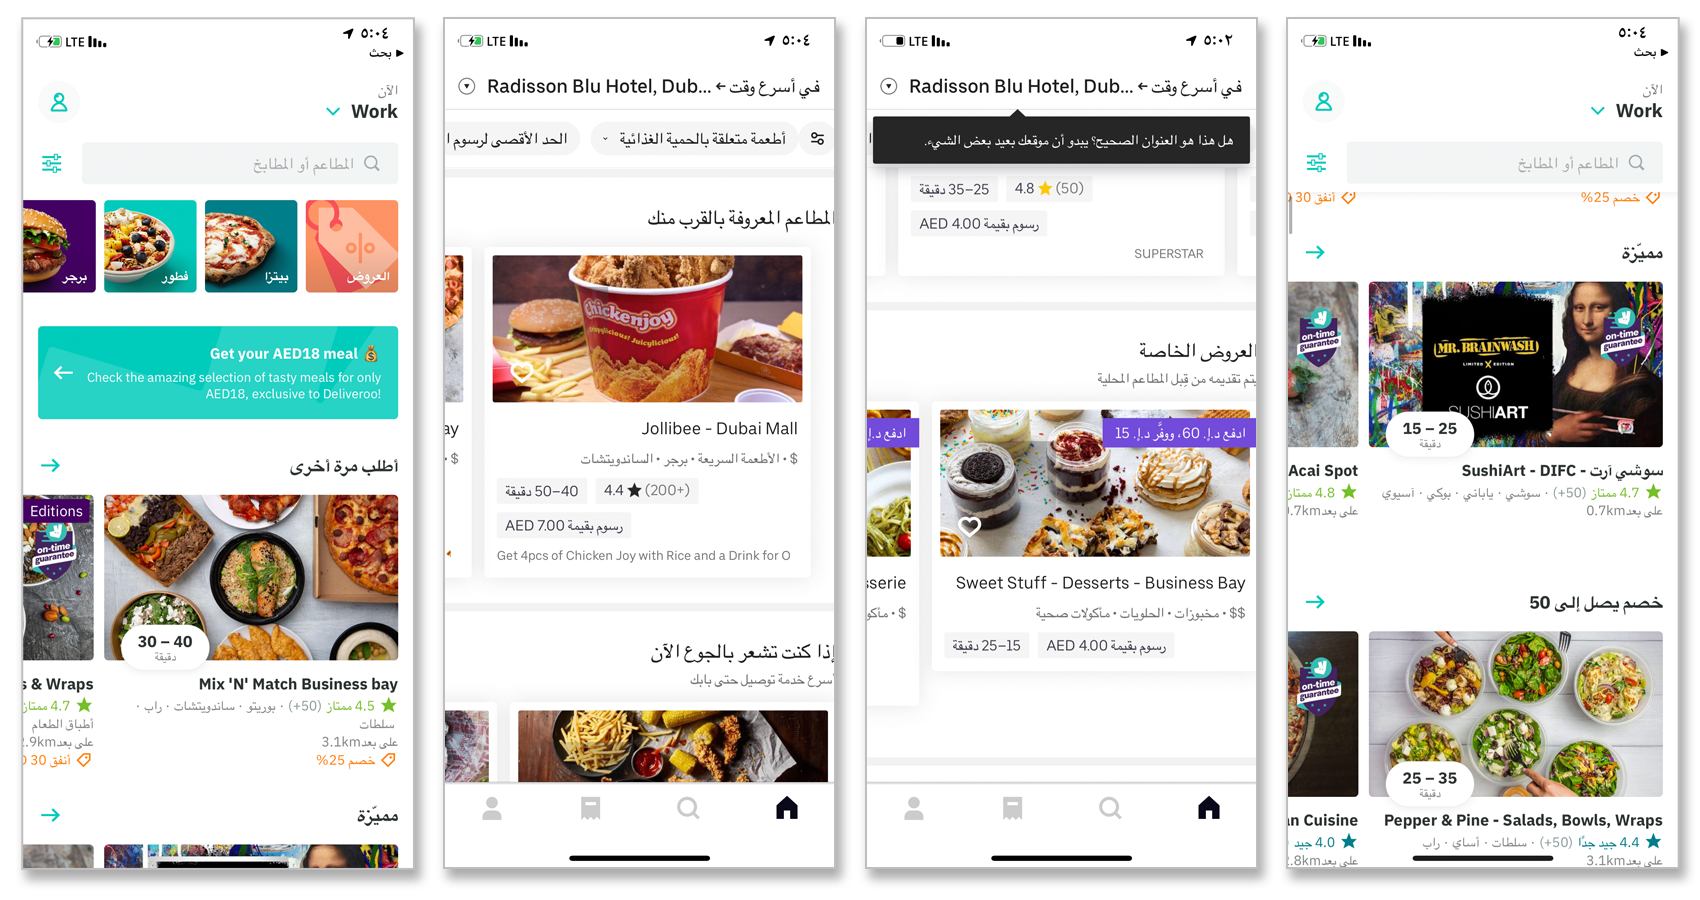 Cross-cultural user experience design for an Arabic food ordering app